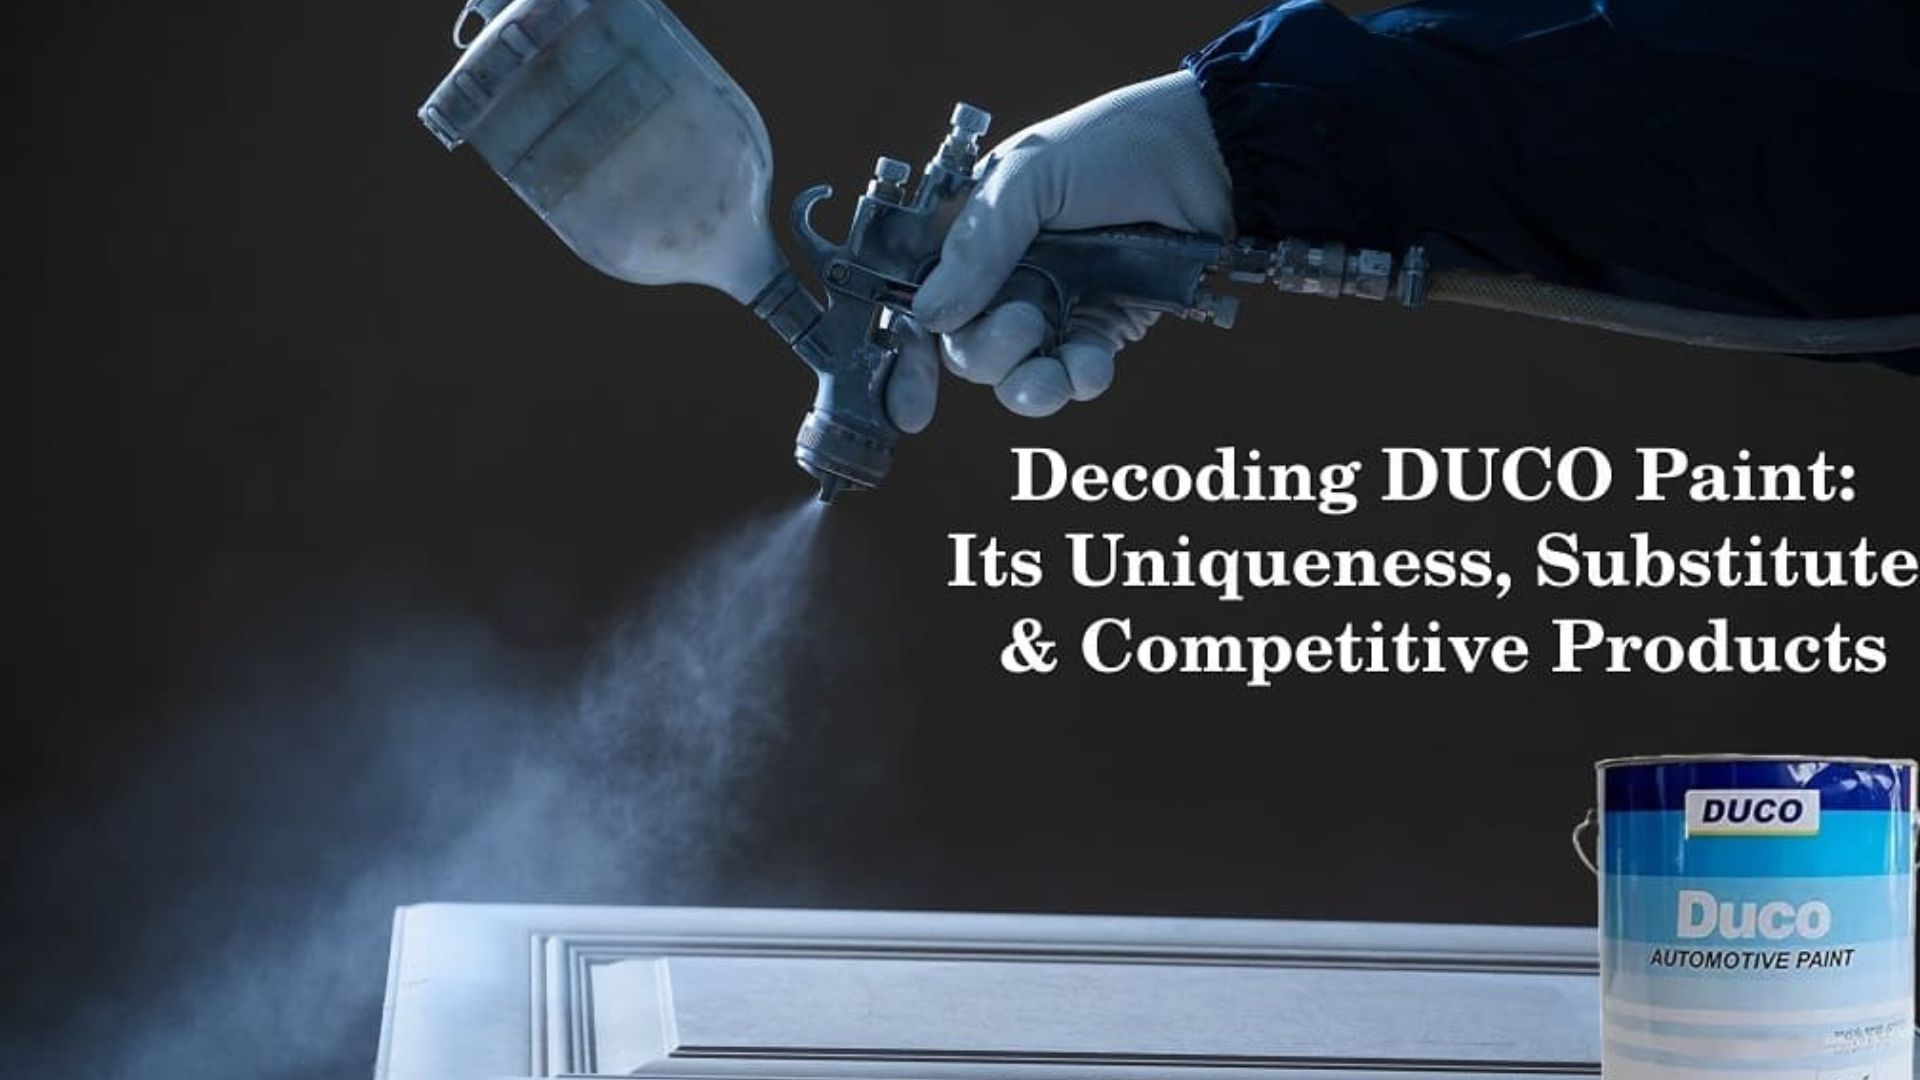 Discover DUCO Paint's : Features, Usage, Benefits and 3 Alternatives